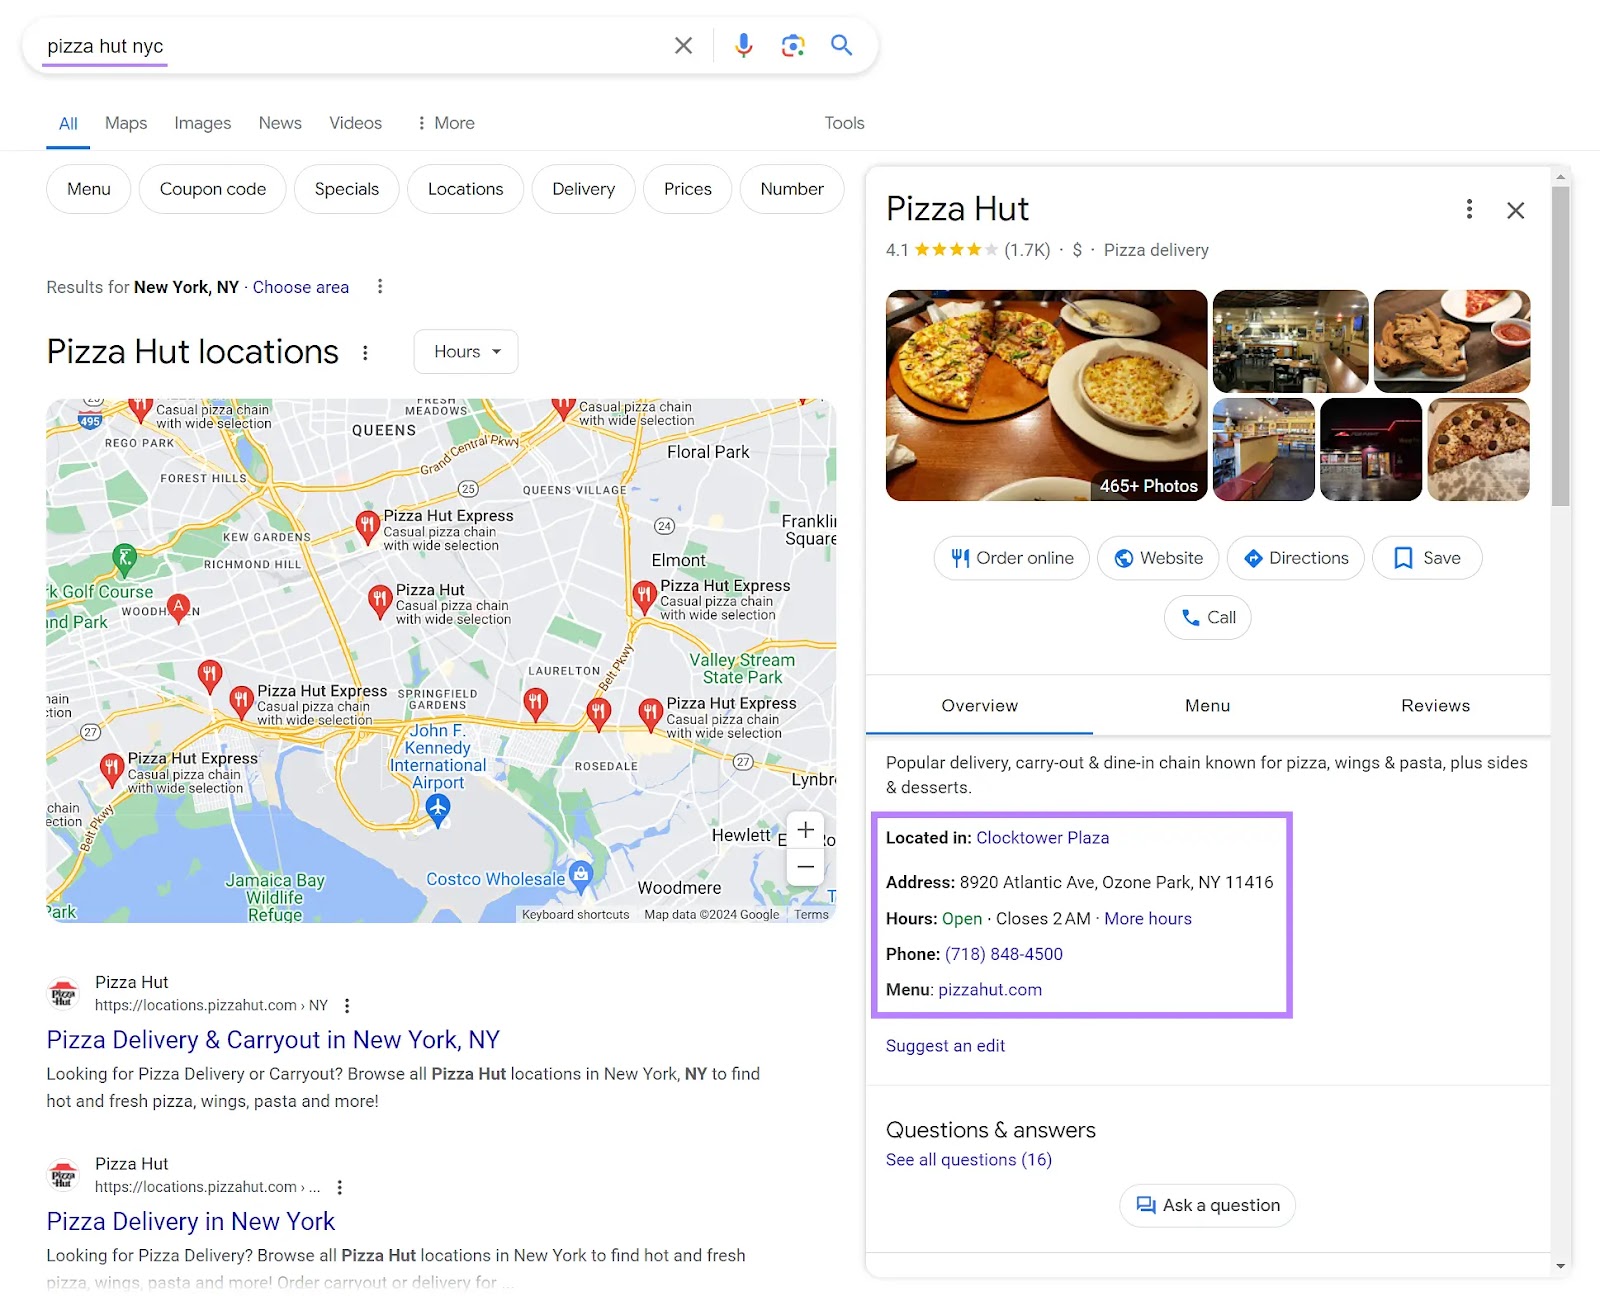 Google SERP of the "pizza hut nyc" keyword with the restaurant's contact information highlighted within the GBP listing.